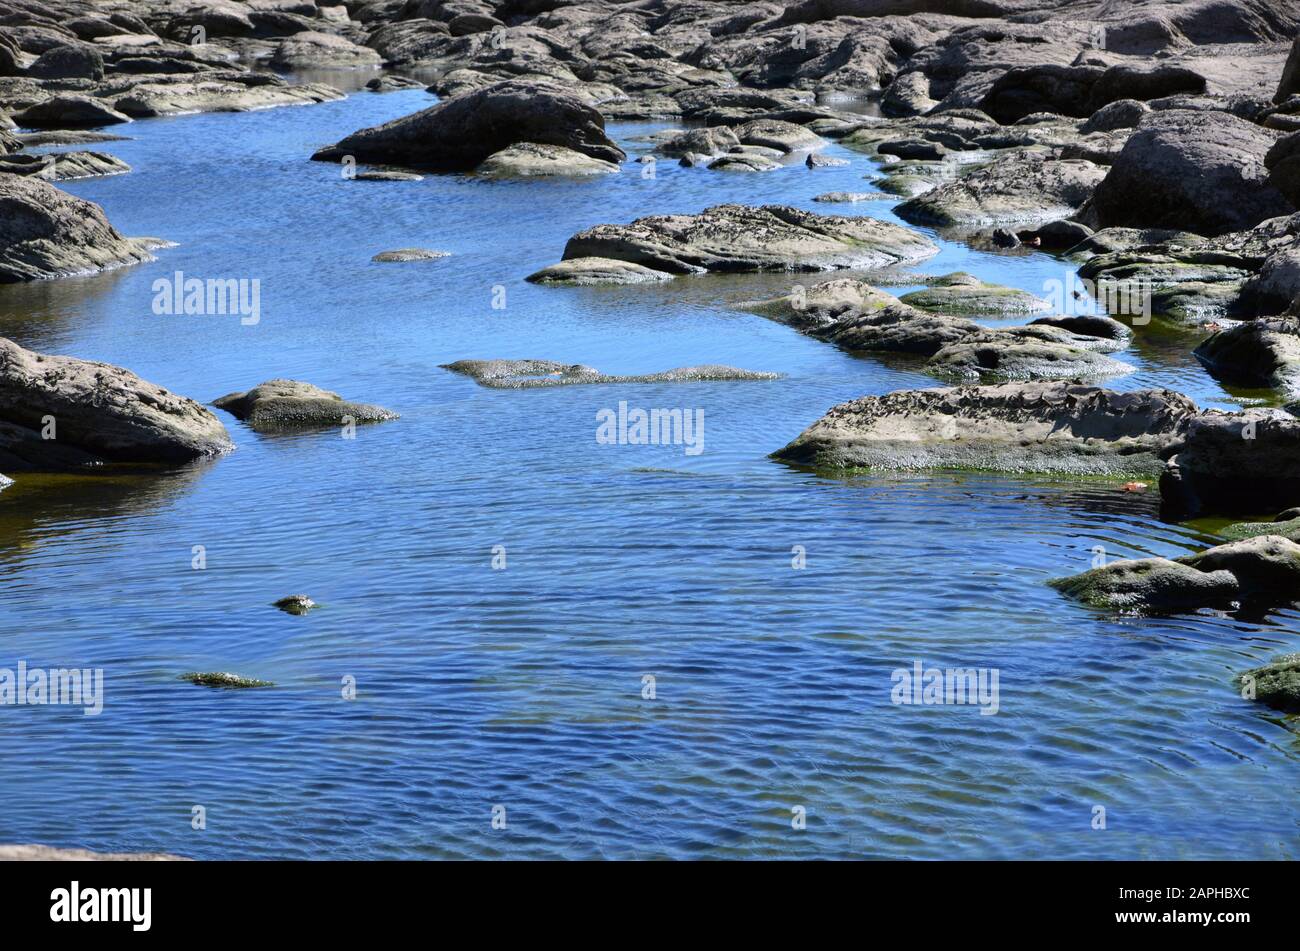 Blue pool in the Susquehanna River Stock Photo